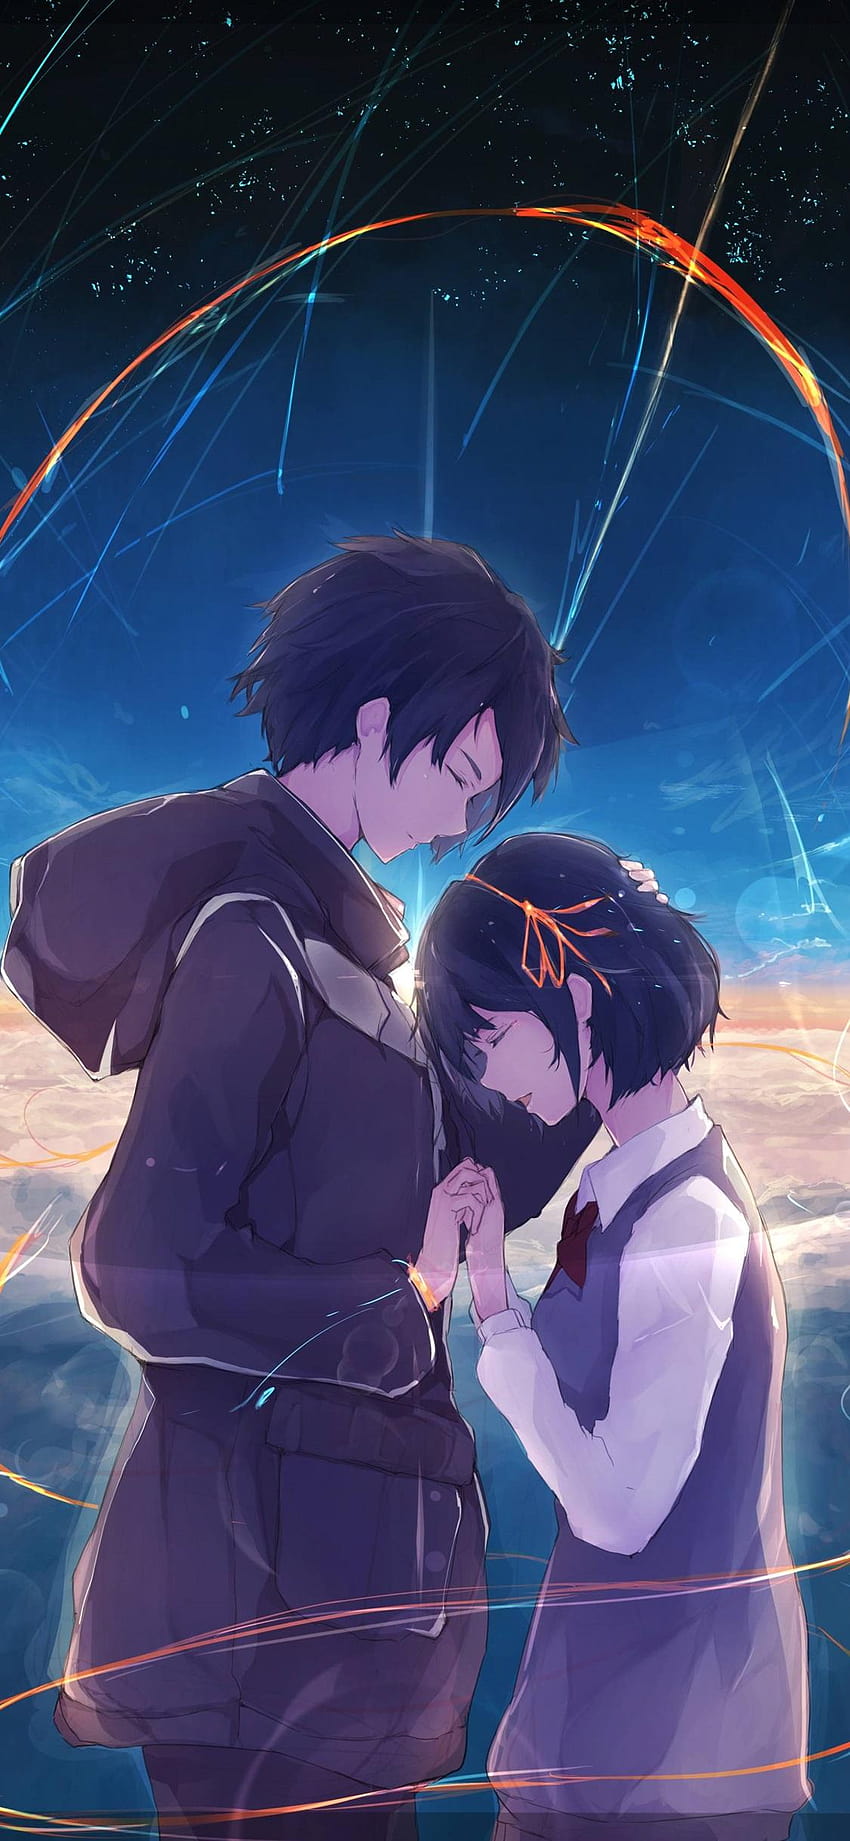 Your Name, happiness, boy and girl, anime 1125x2436 iPhone, anime kiss iphone HD phone wallpaper